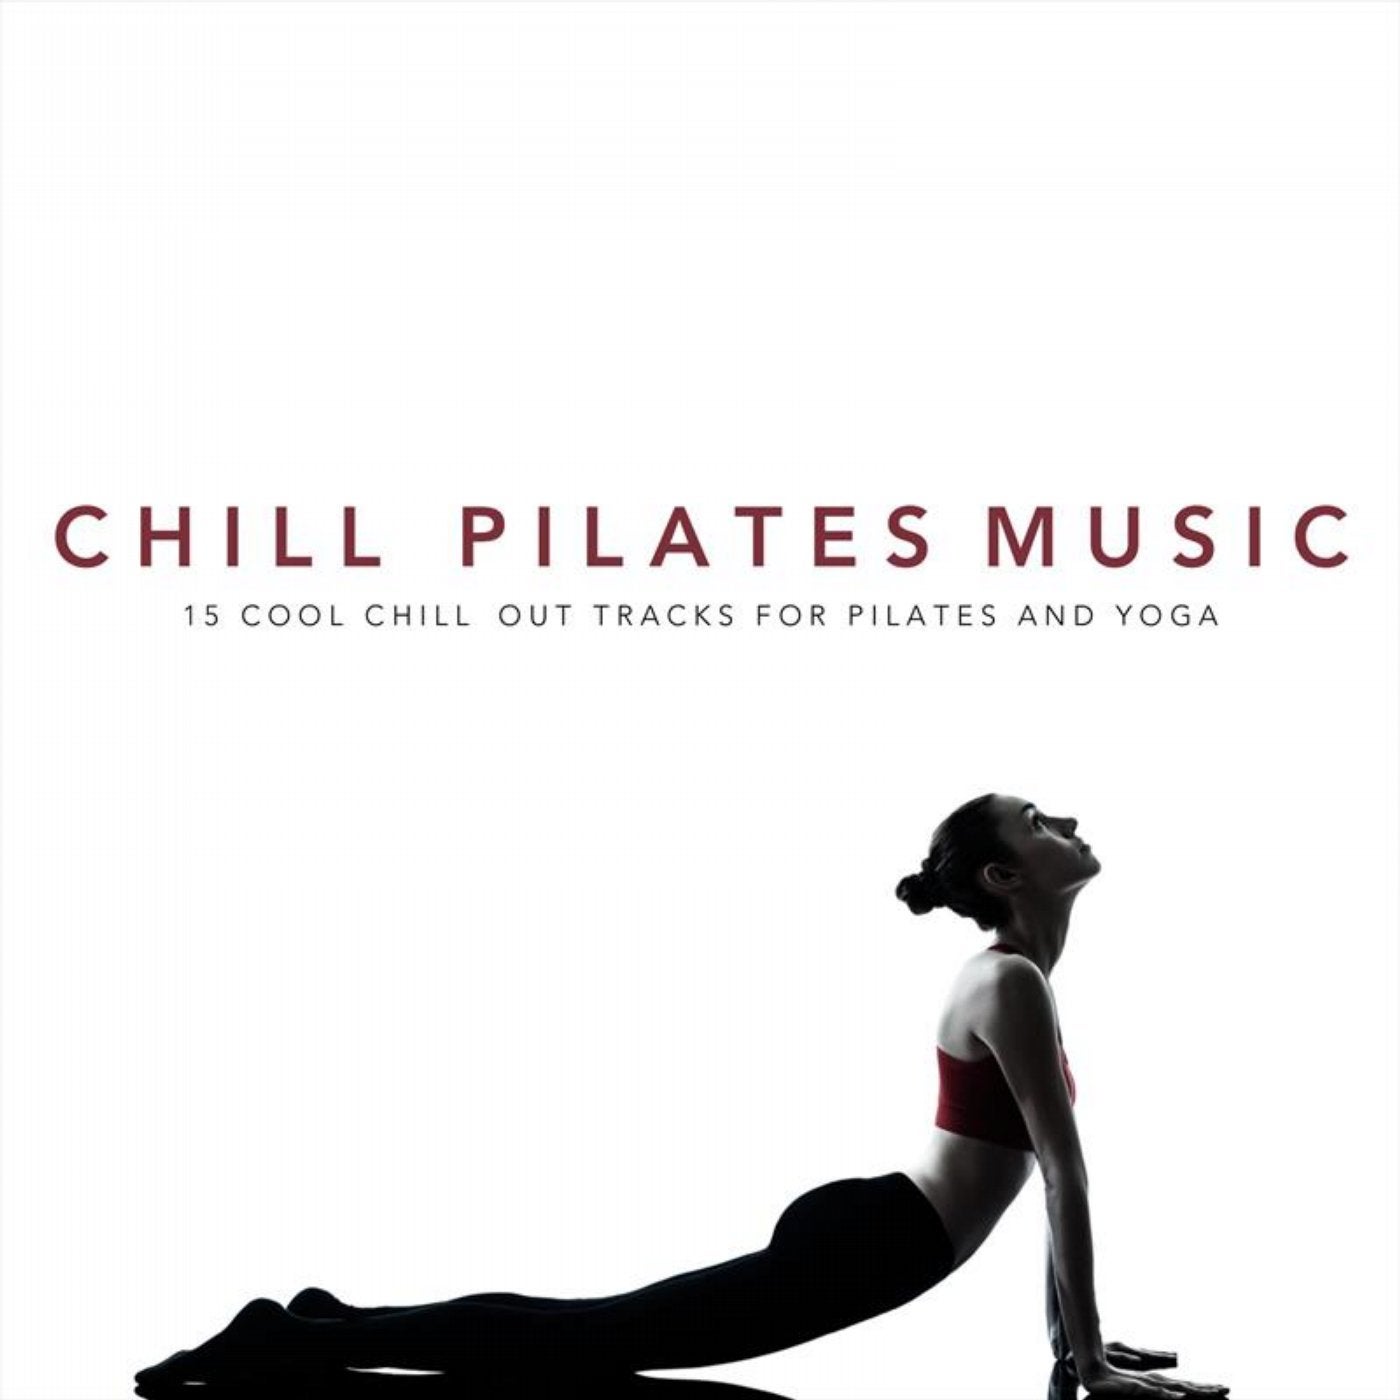 Chill Pilates Music: 15 Cool Chill Out Tracks for Pilates and Yoga